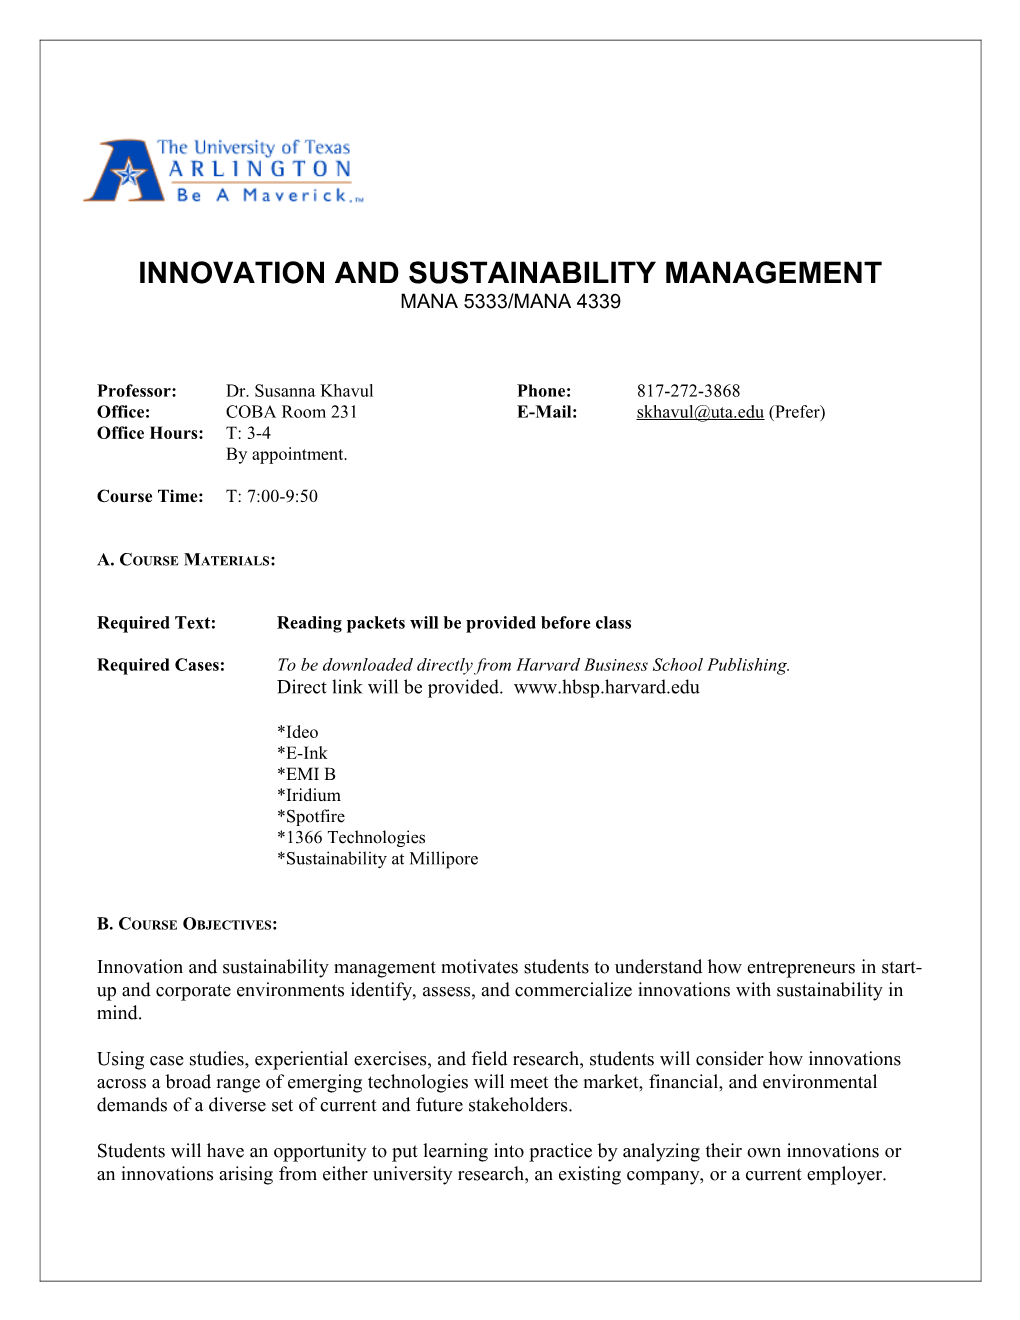 Innovation and Sustainability Management